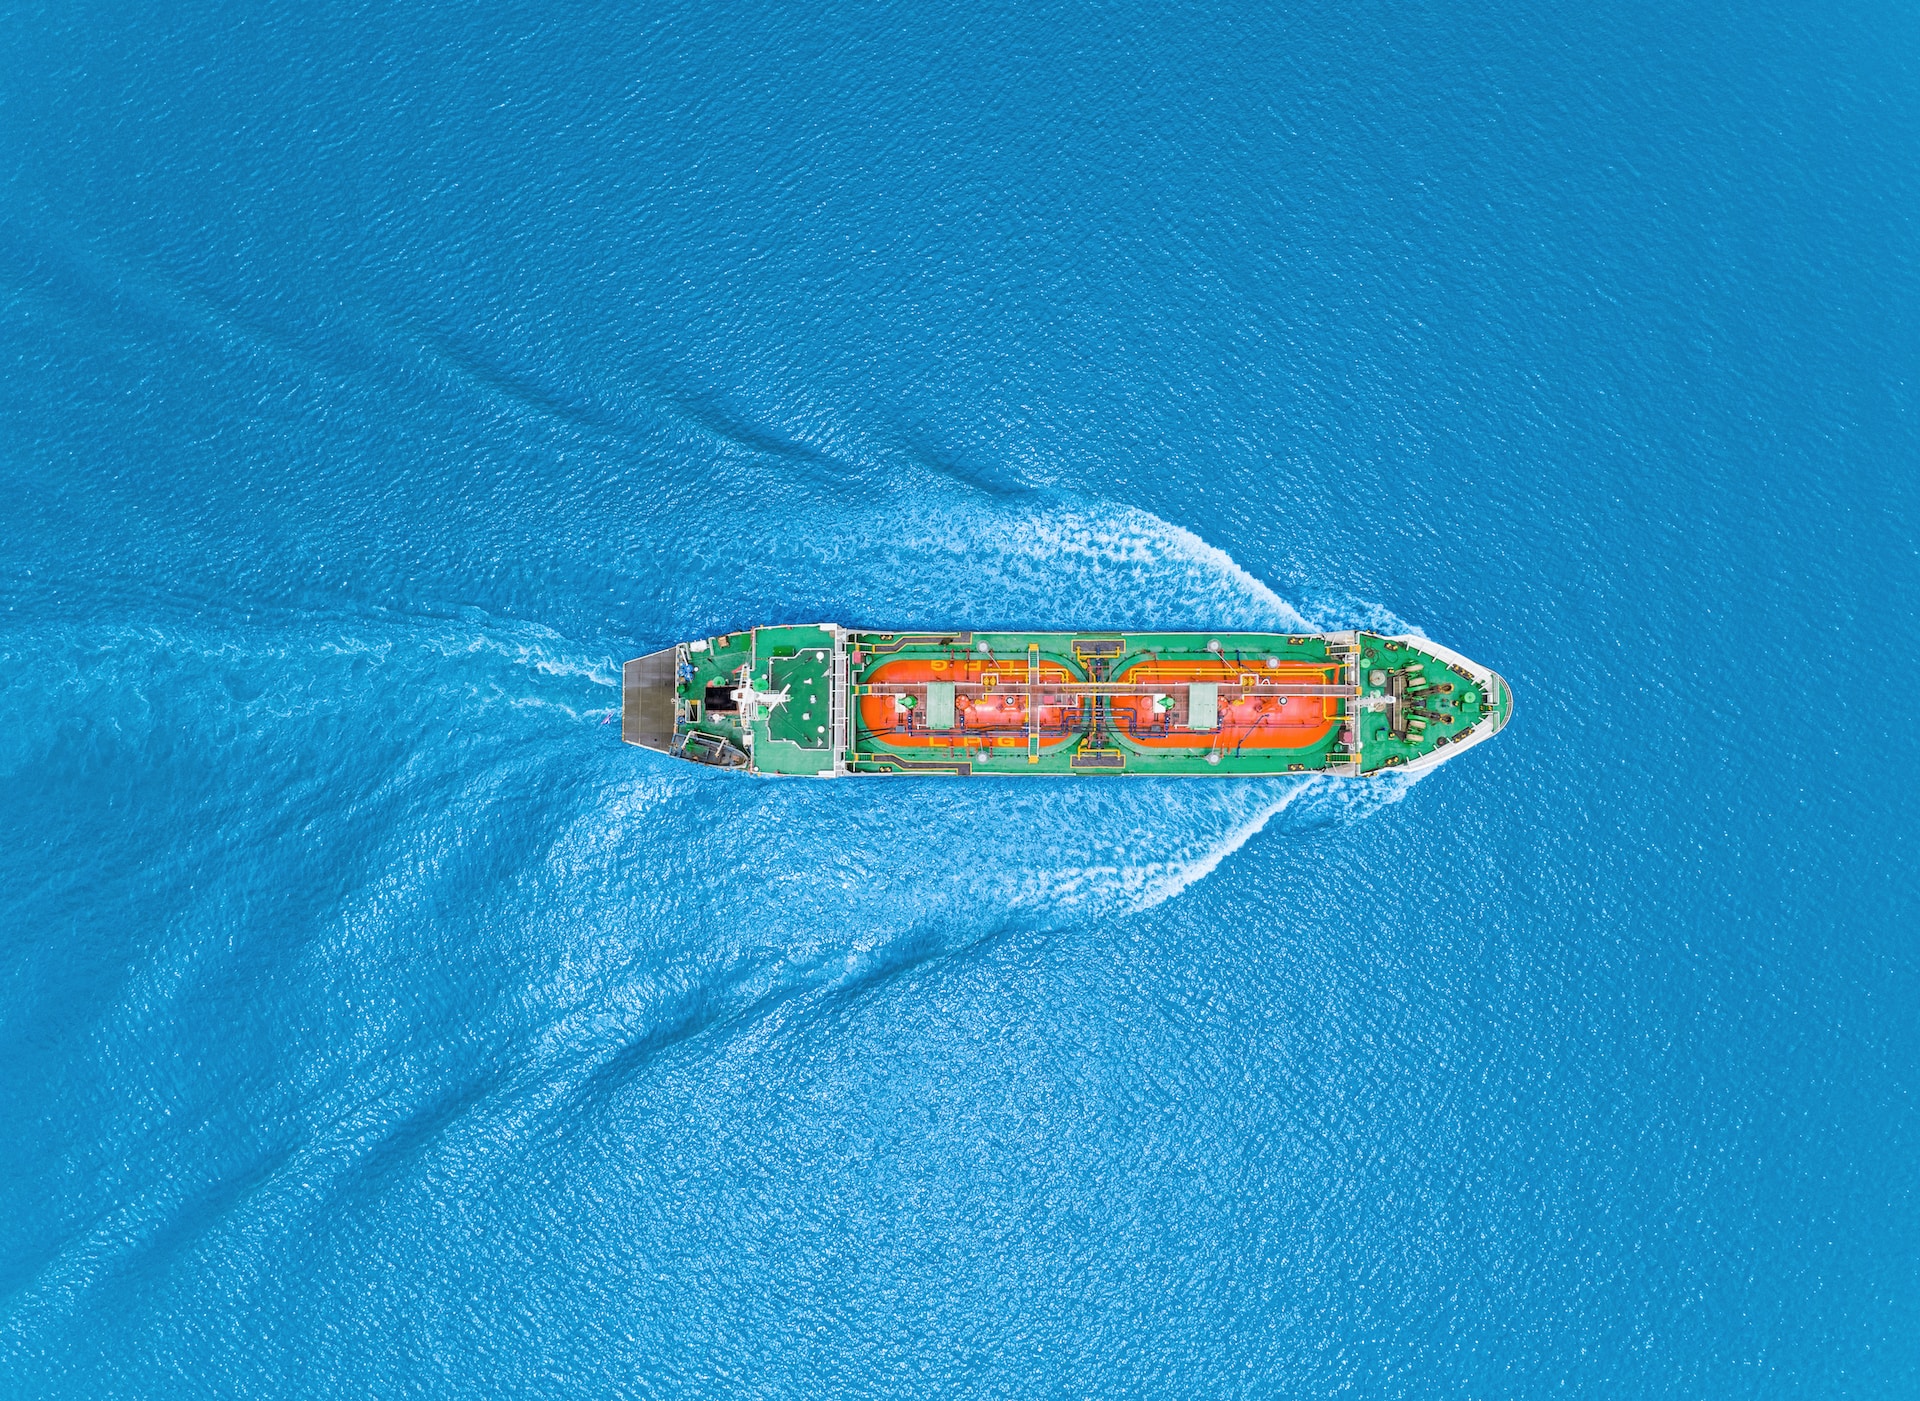 Aerial view of an LNG carrier